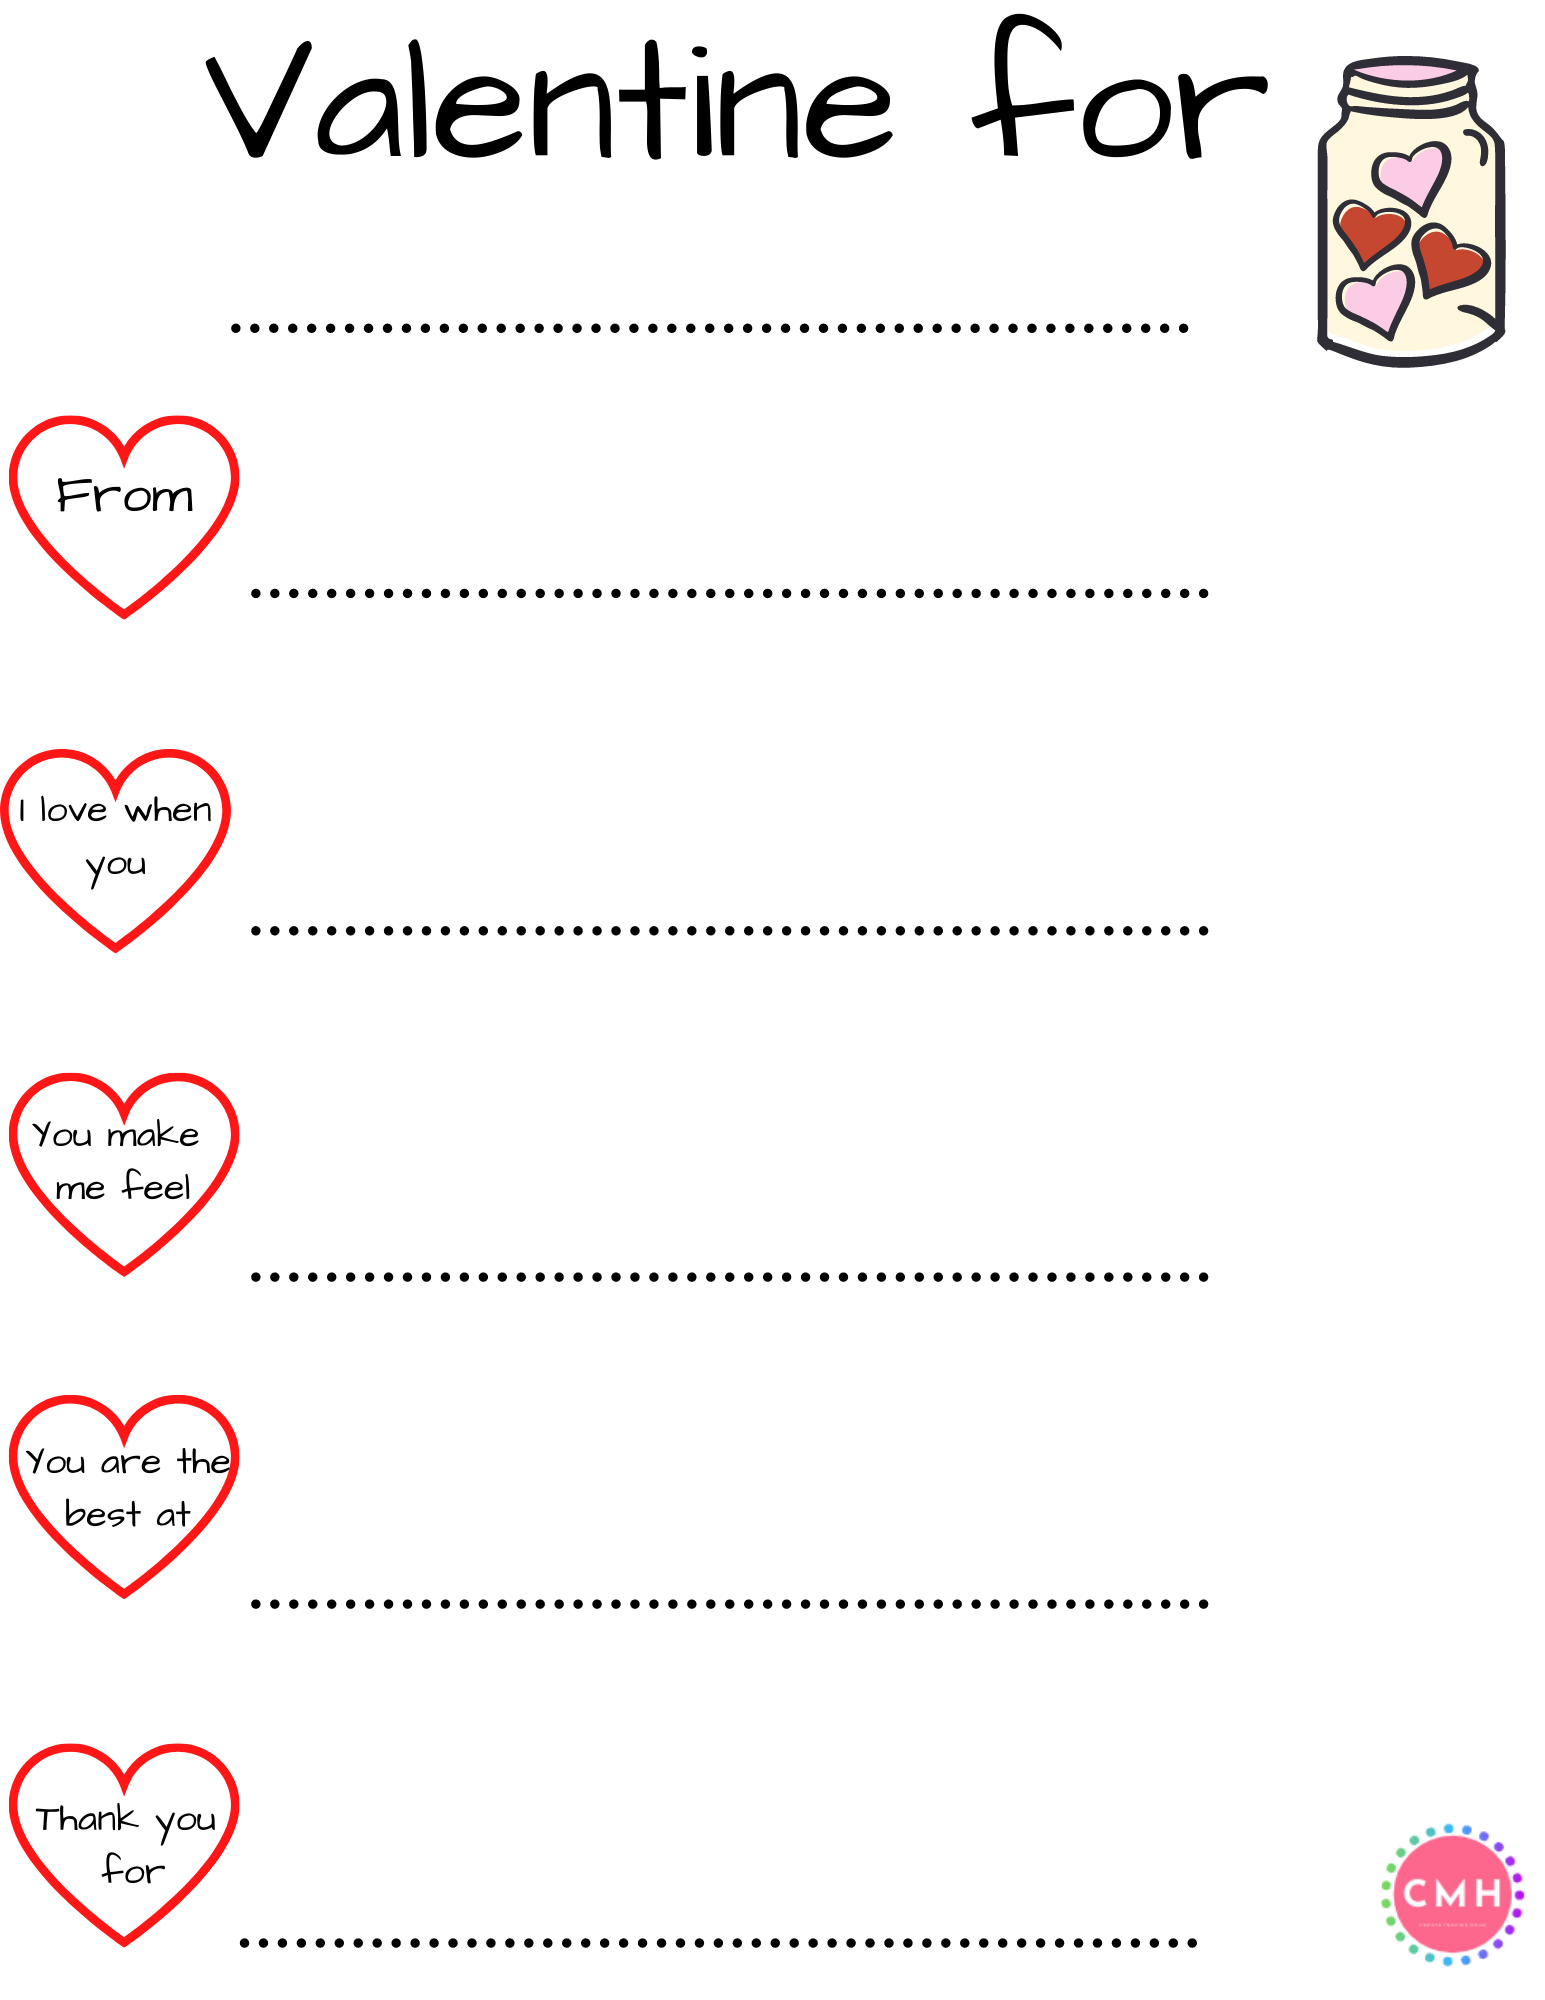 Free Valentine Printable for kids to express to their loved ones how they feel this Valentine's Day! via @classroommusthaves